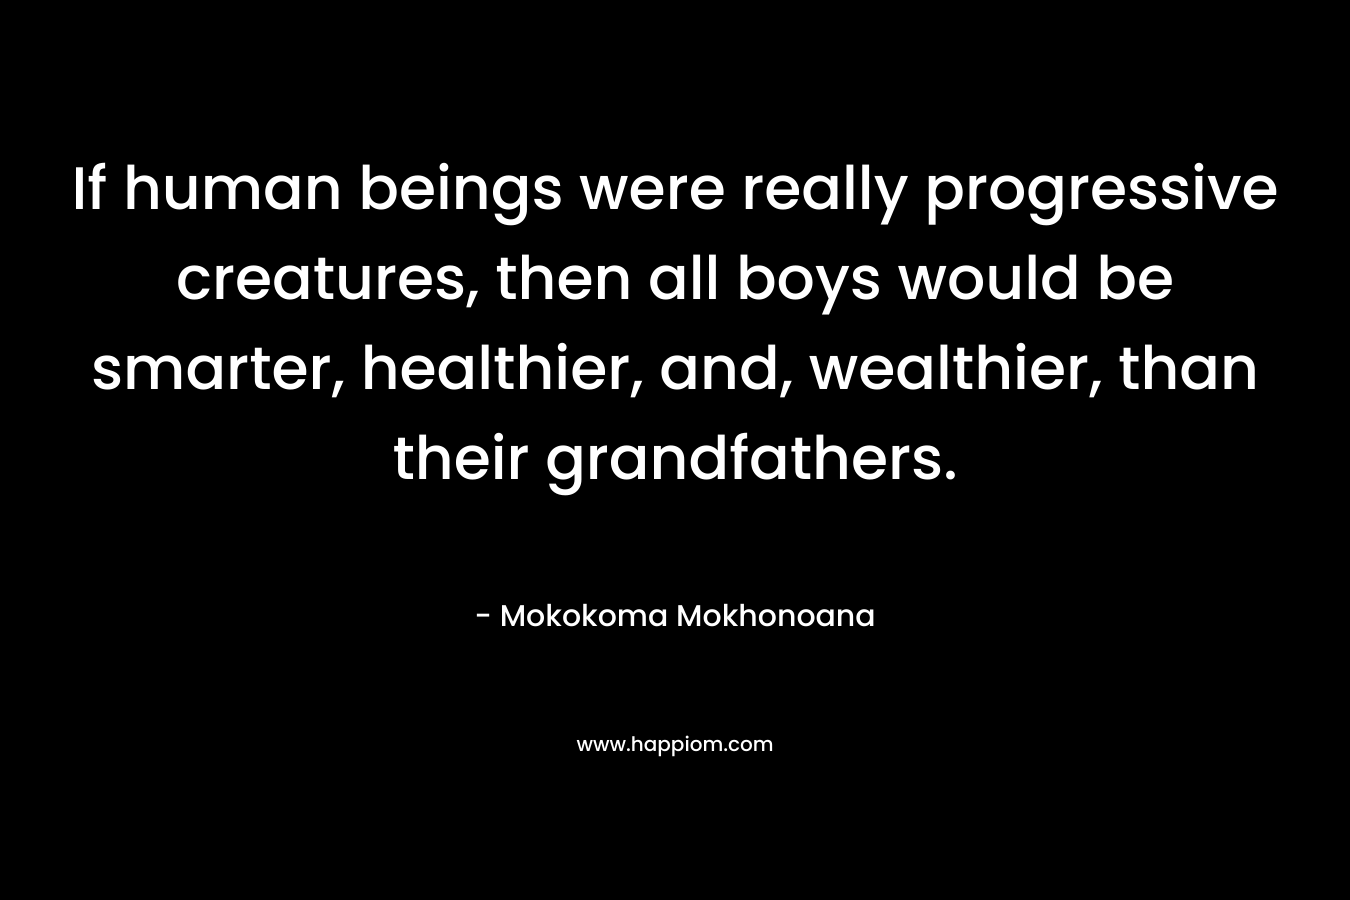 If human beings were really progressive creatures, then all boys would be smarter, healthier, and, wealthier, than their grandfathers.